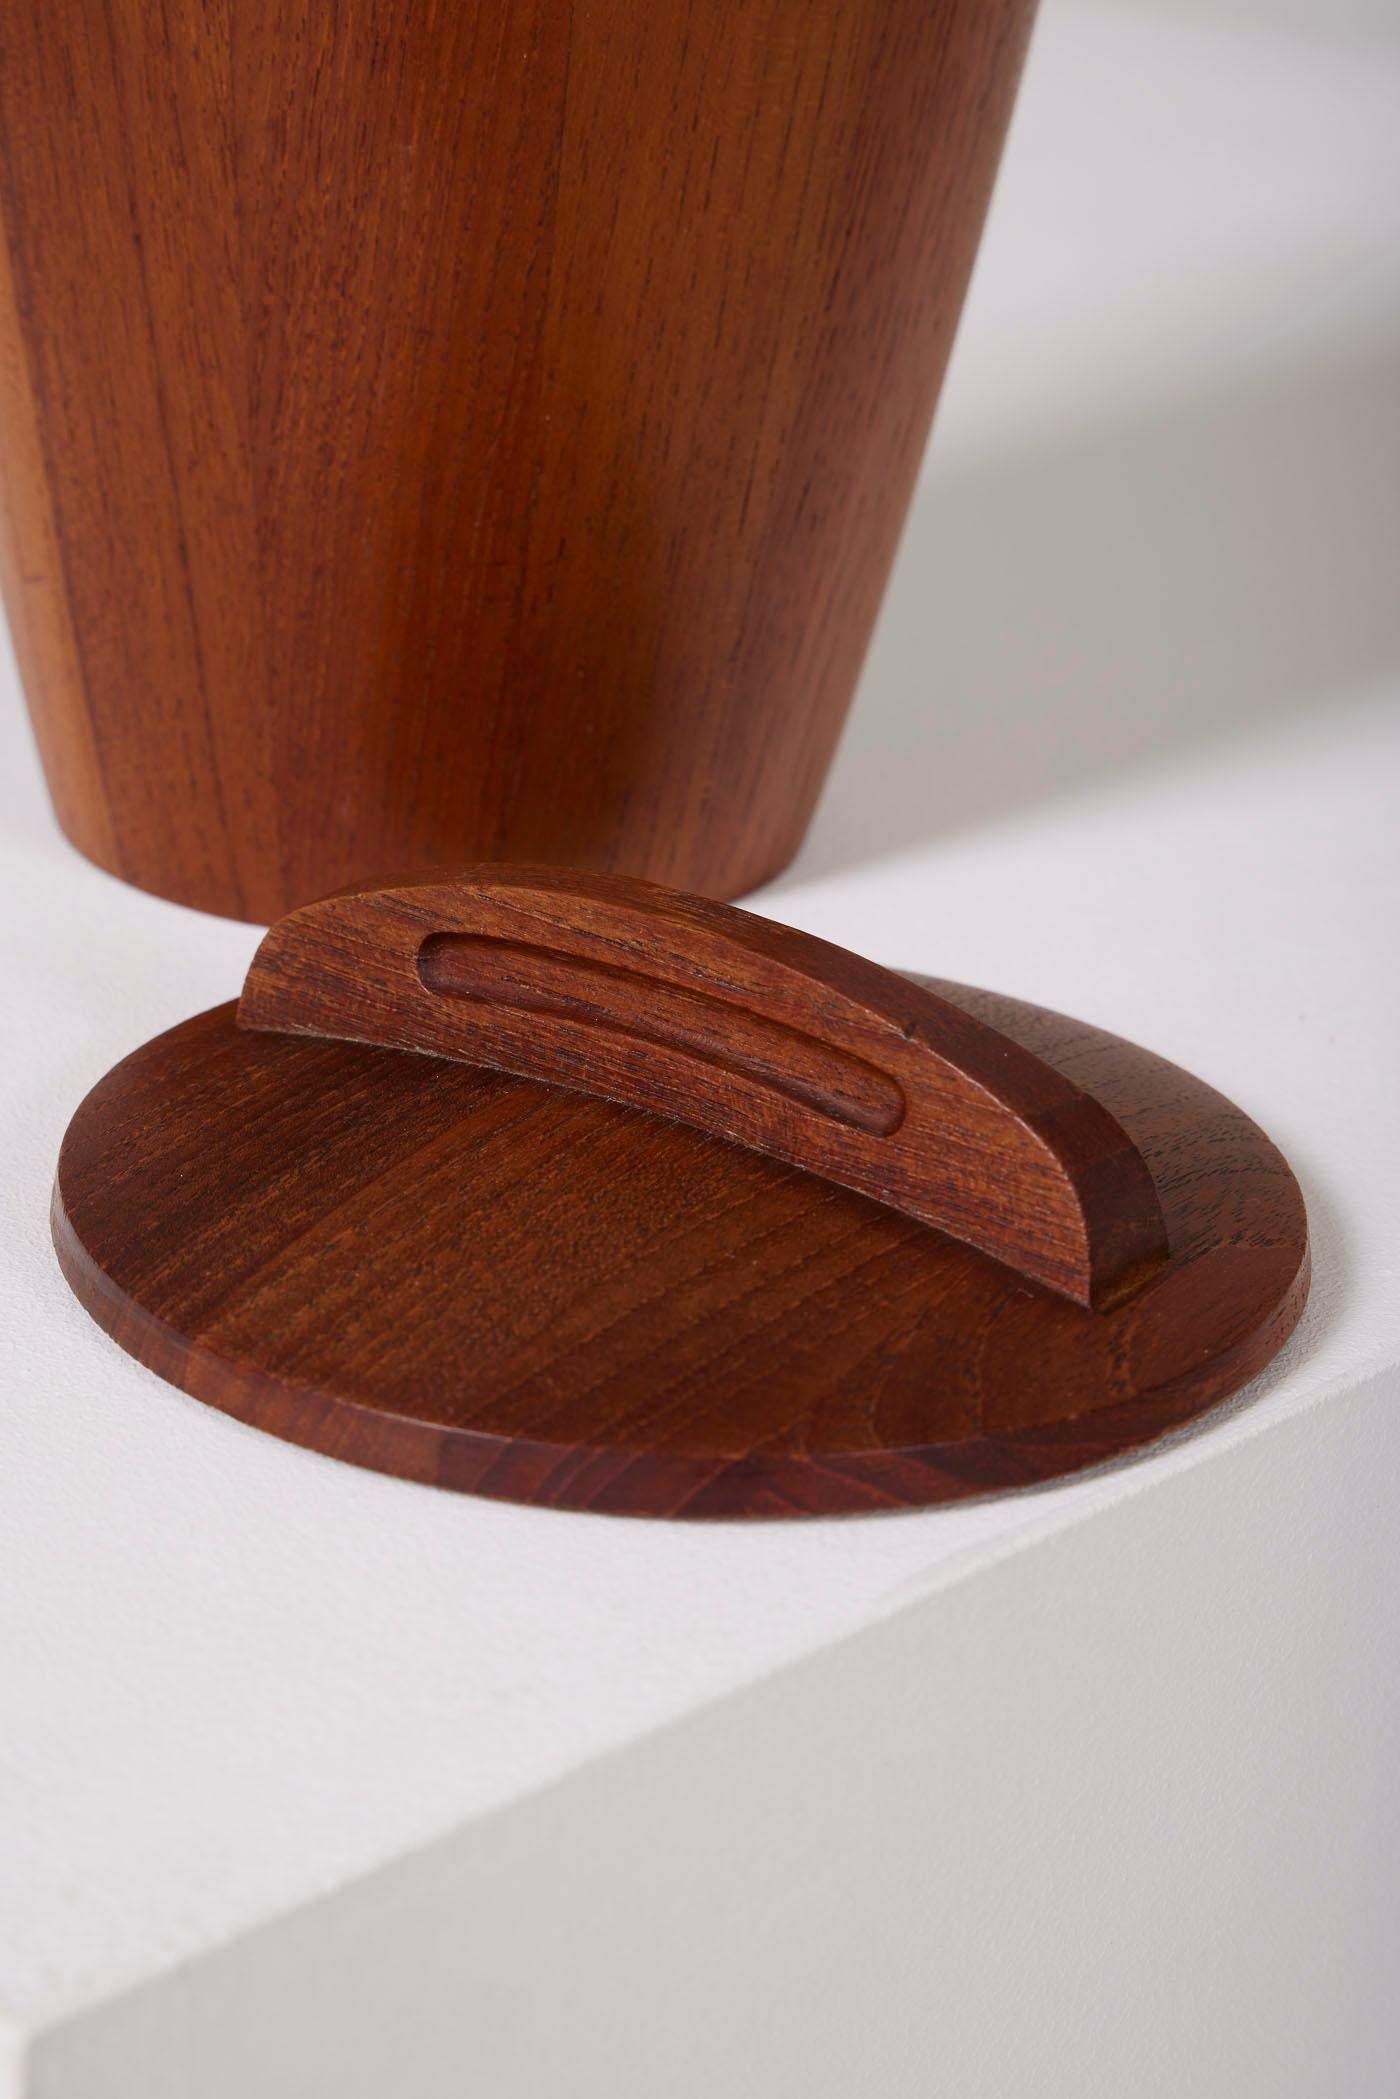 Wood Ice bucket in wood by Jens Quitsgaard For Sale